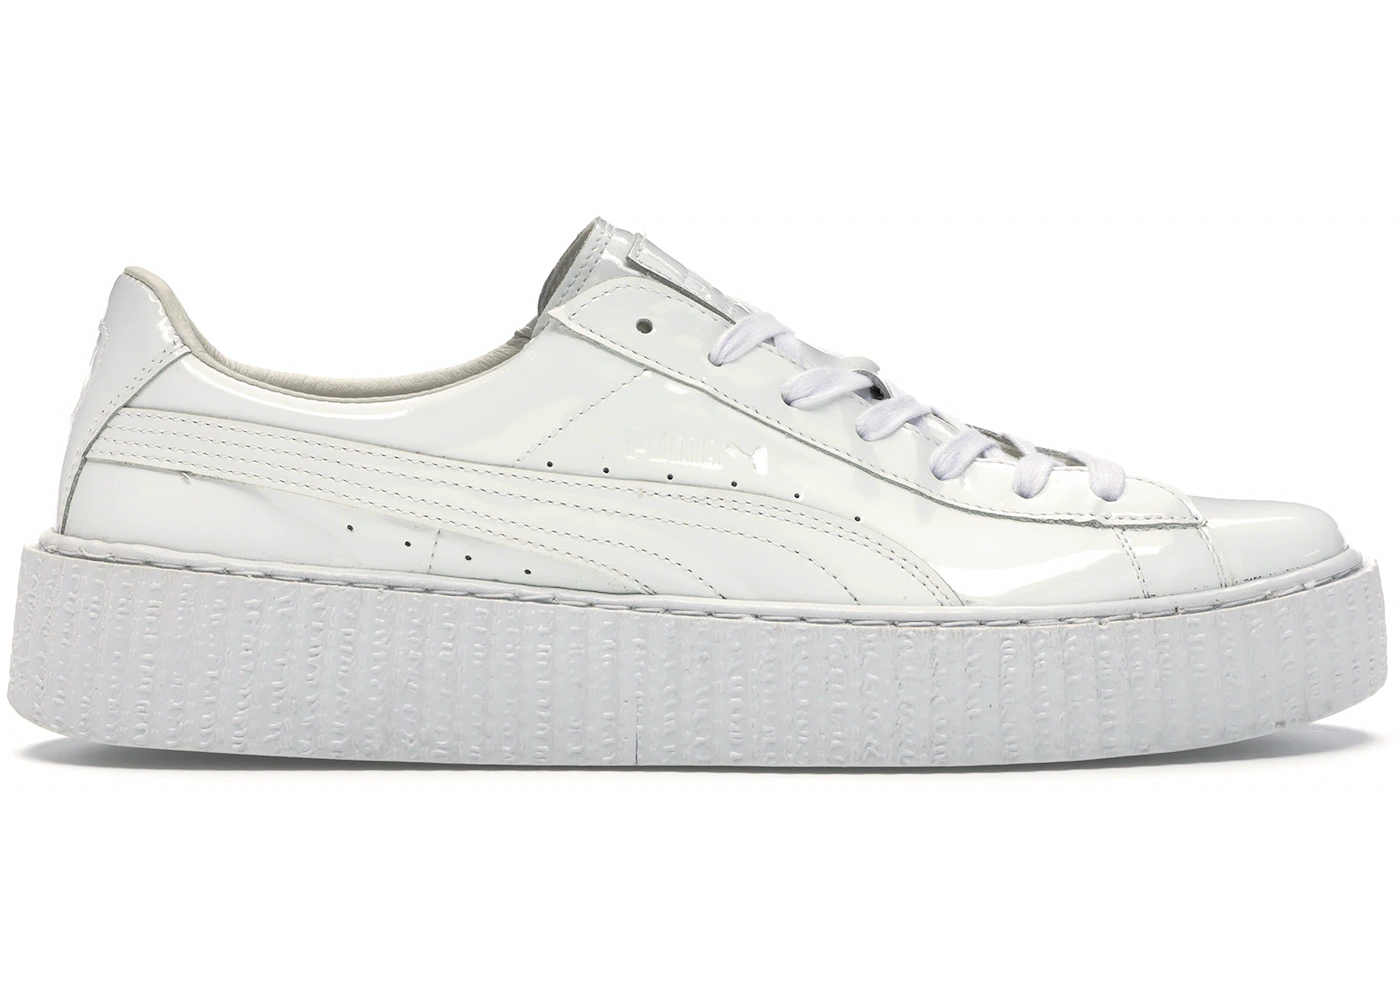 Engage Clip butterfly assign Puma Creepers Rihanna Fenty Glossy White - 363275-01 - US